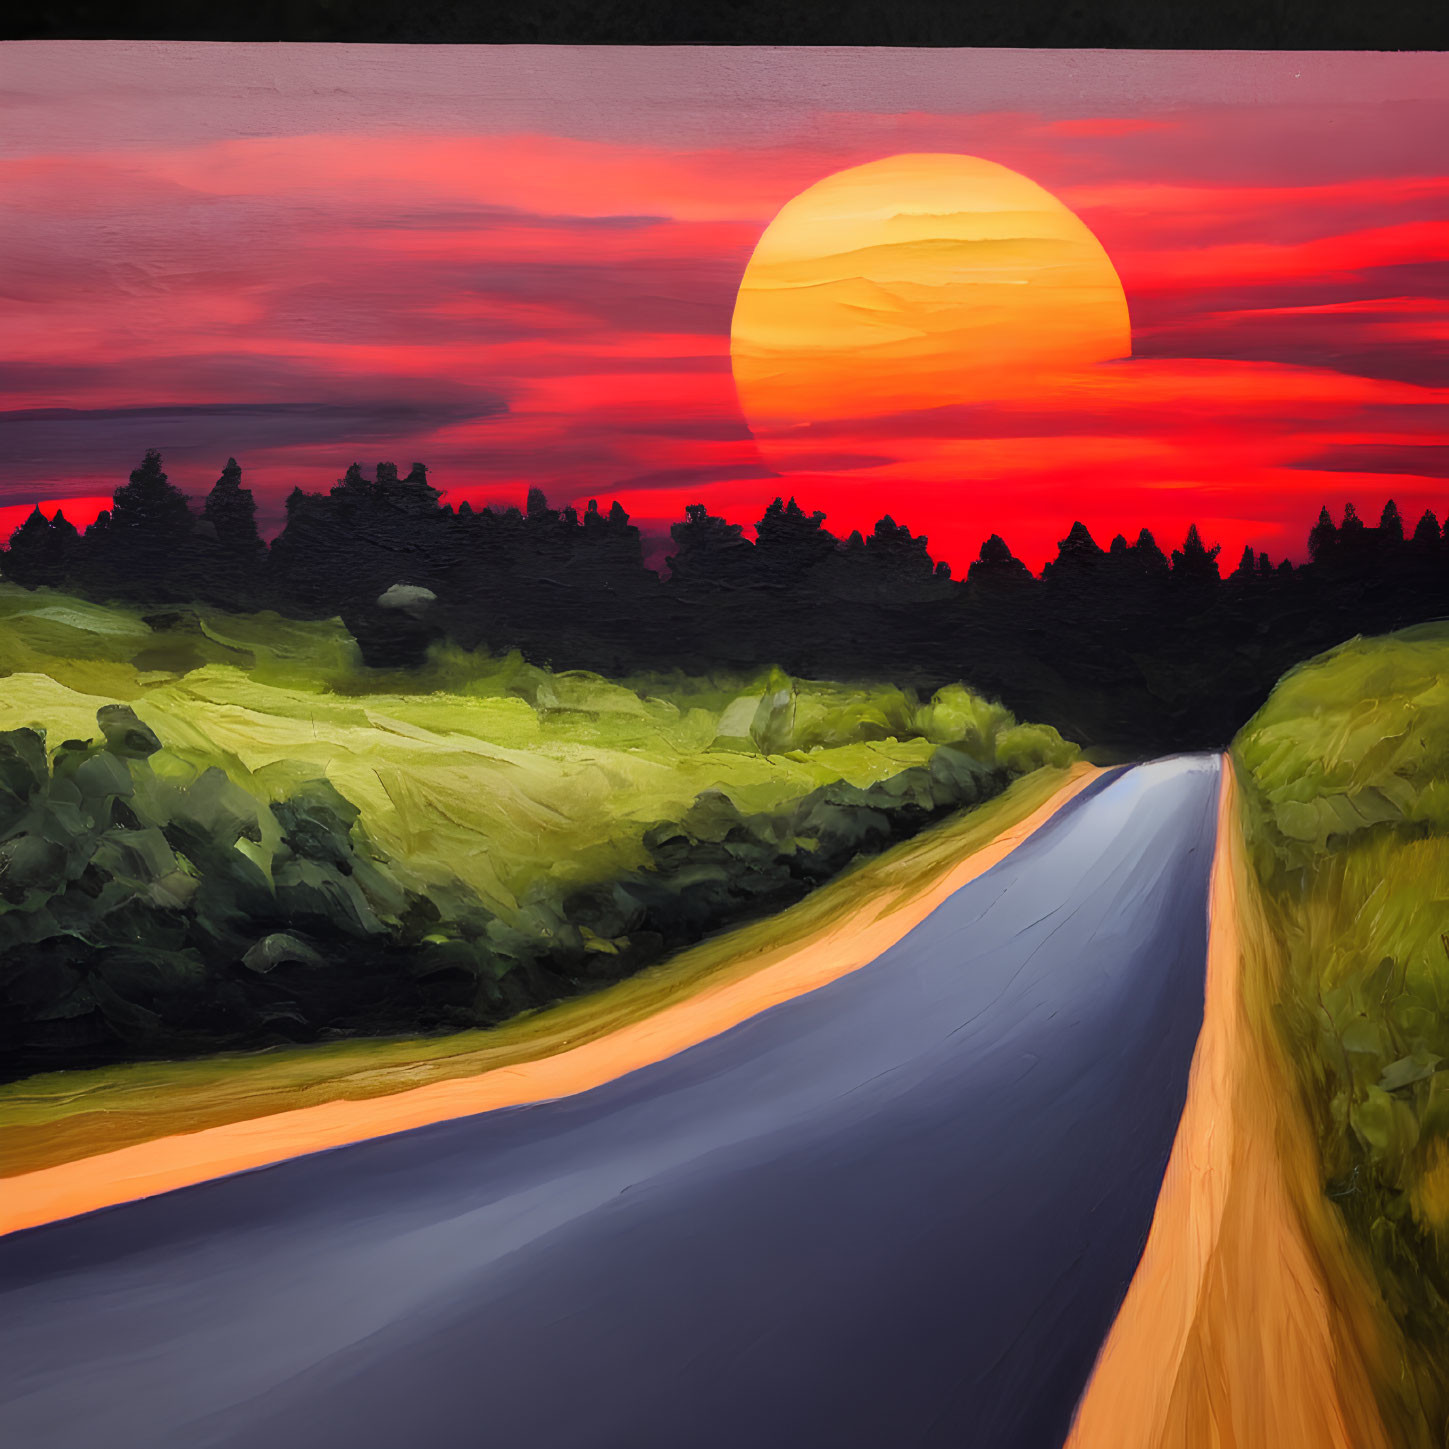 Scenic painting of sunset road with orange sun and silhouetted trees